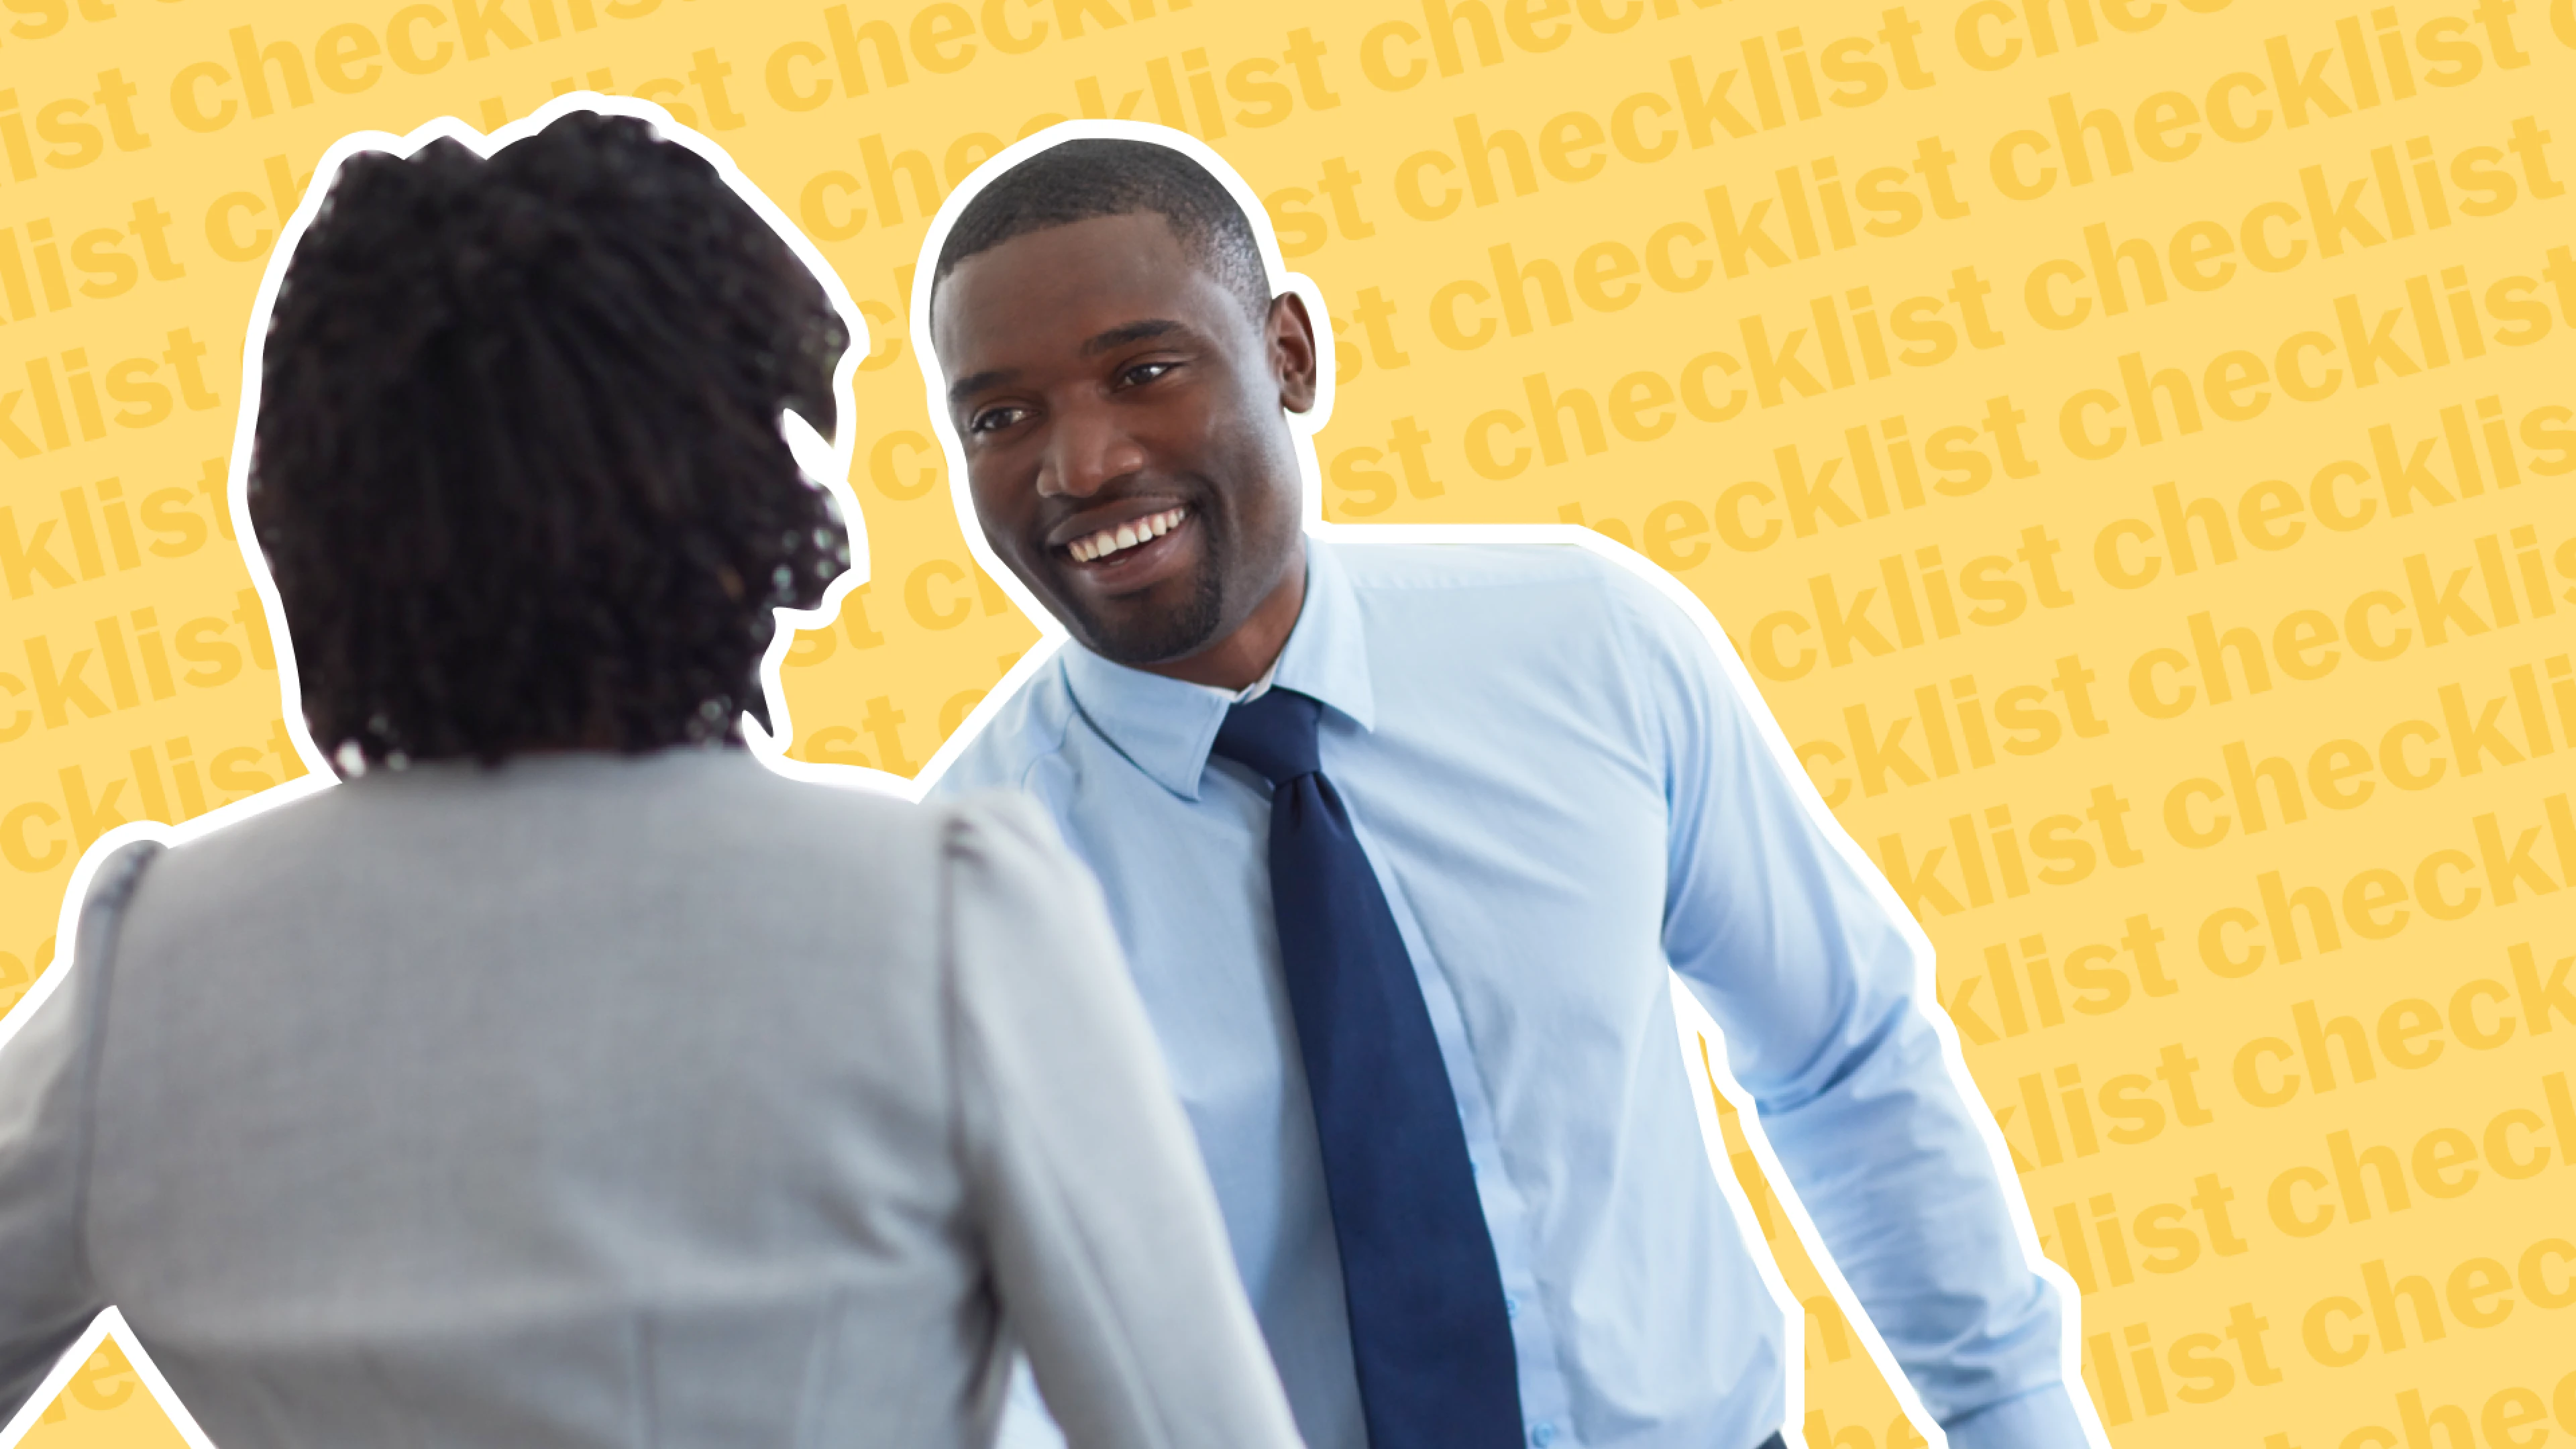 Blog - Hero - [Infographic] Use Our New Hire Checklist To Keep Compliant